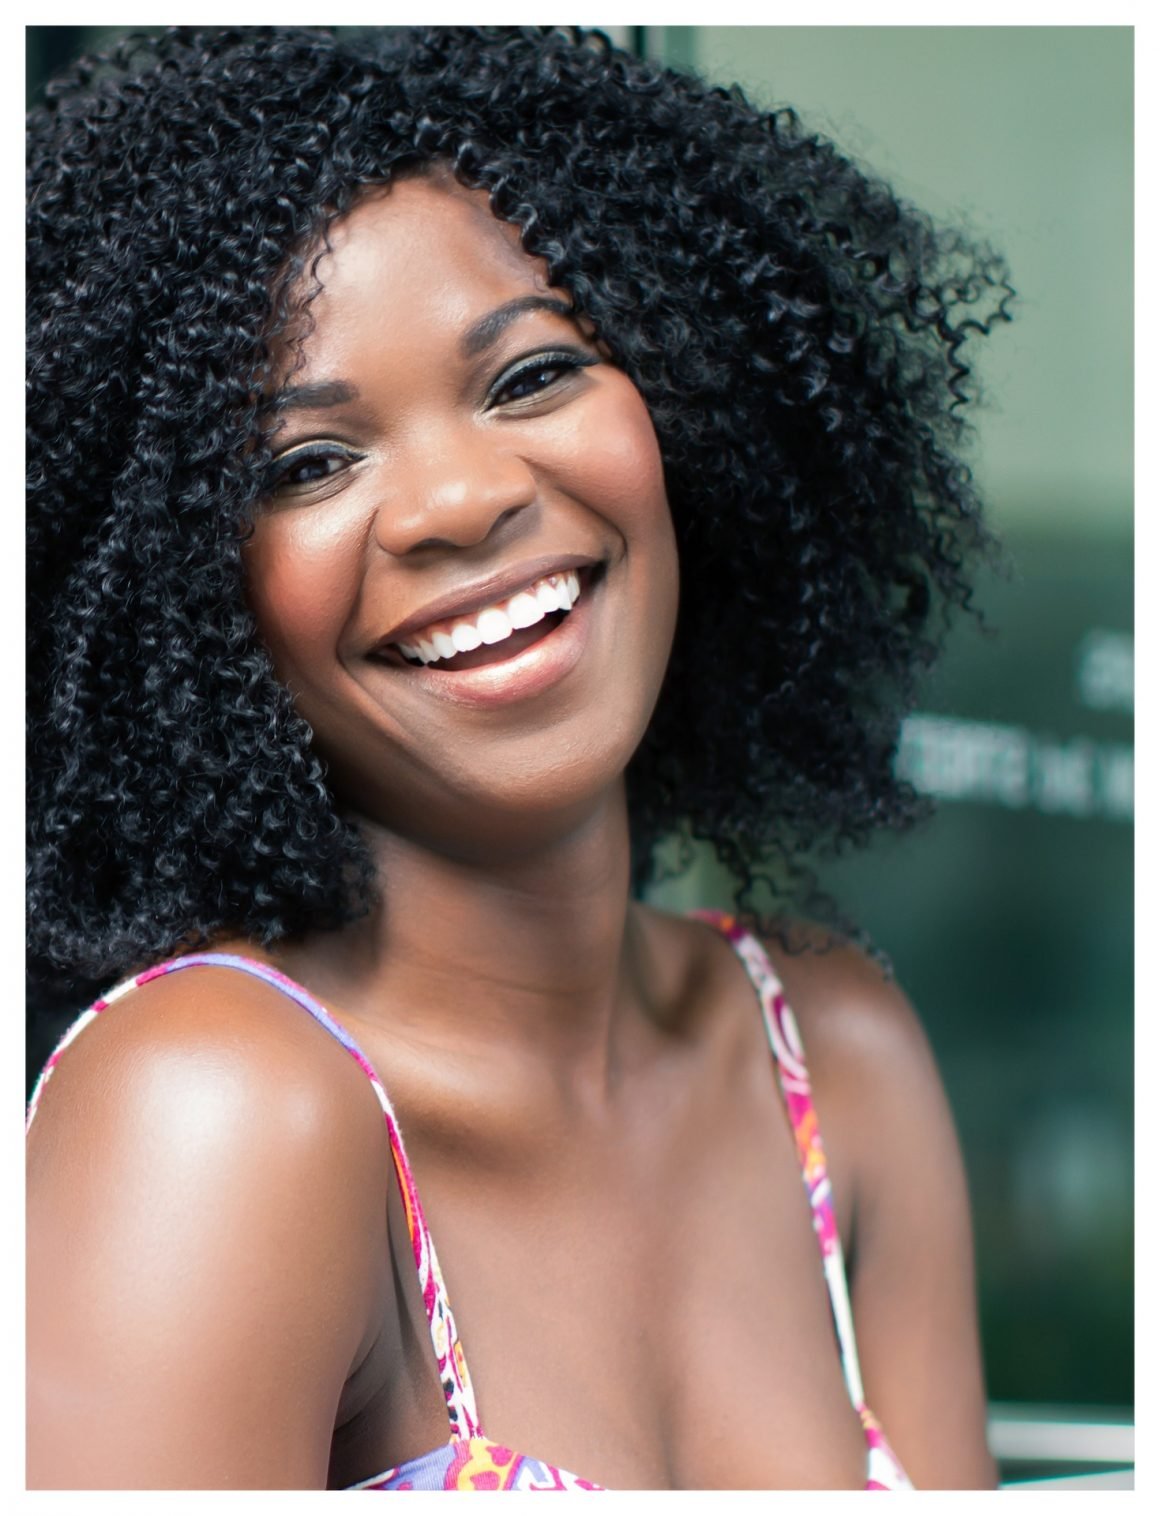 3 Reasons Teeth Whitening Improves Confidence and Health